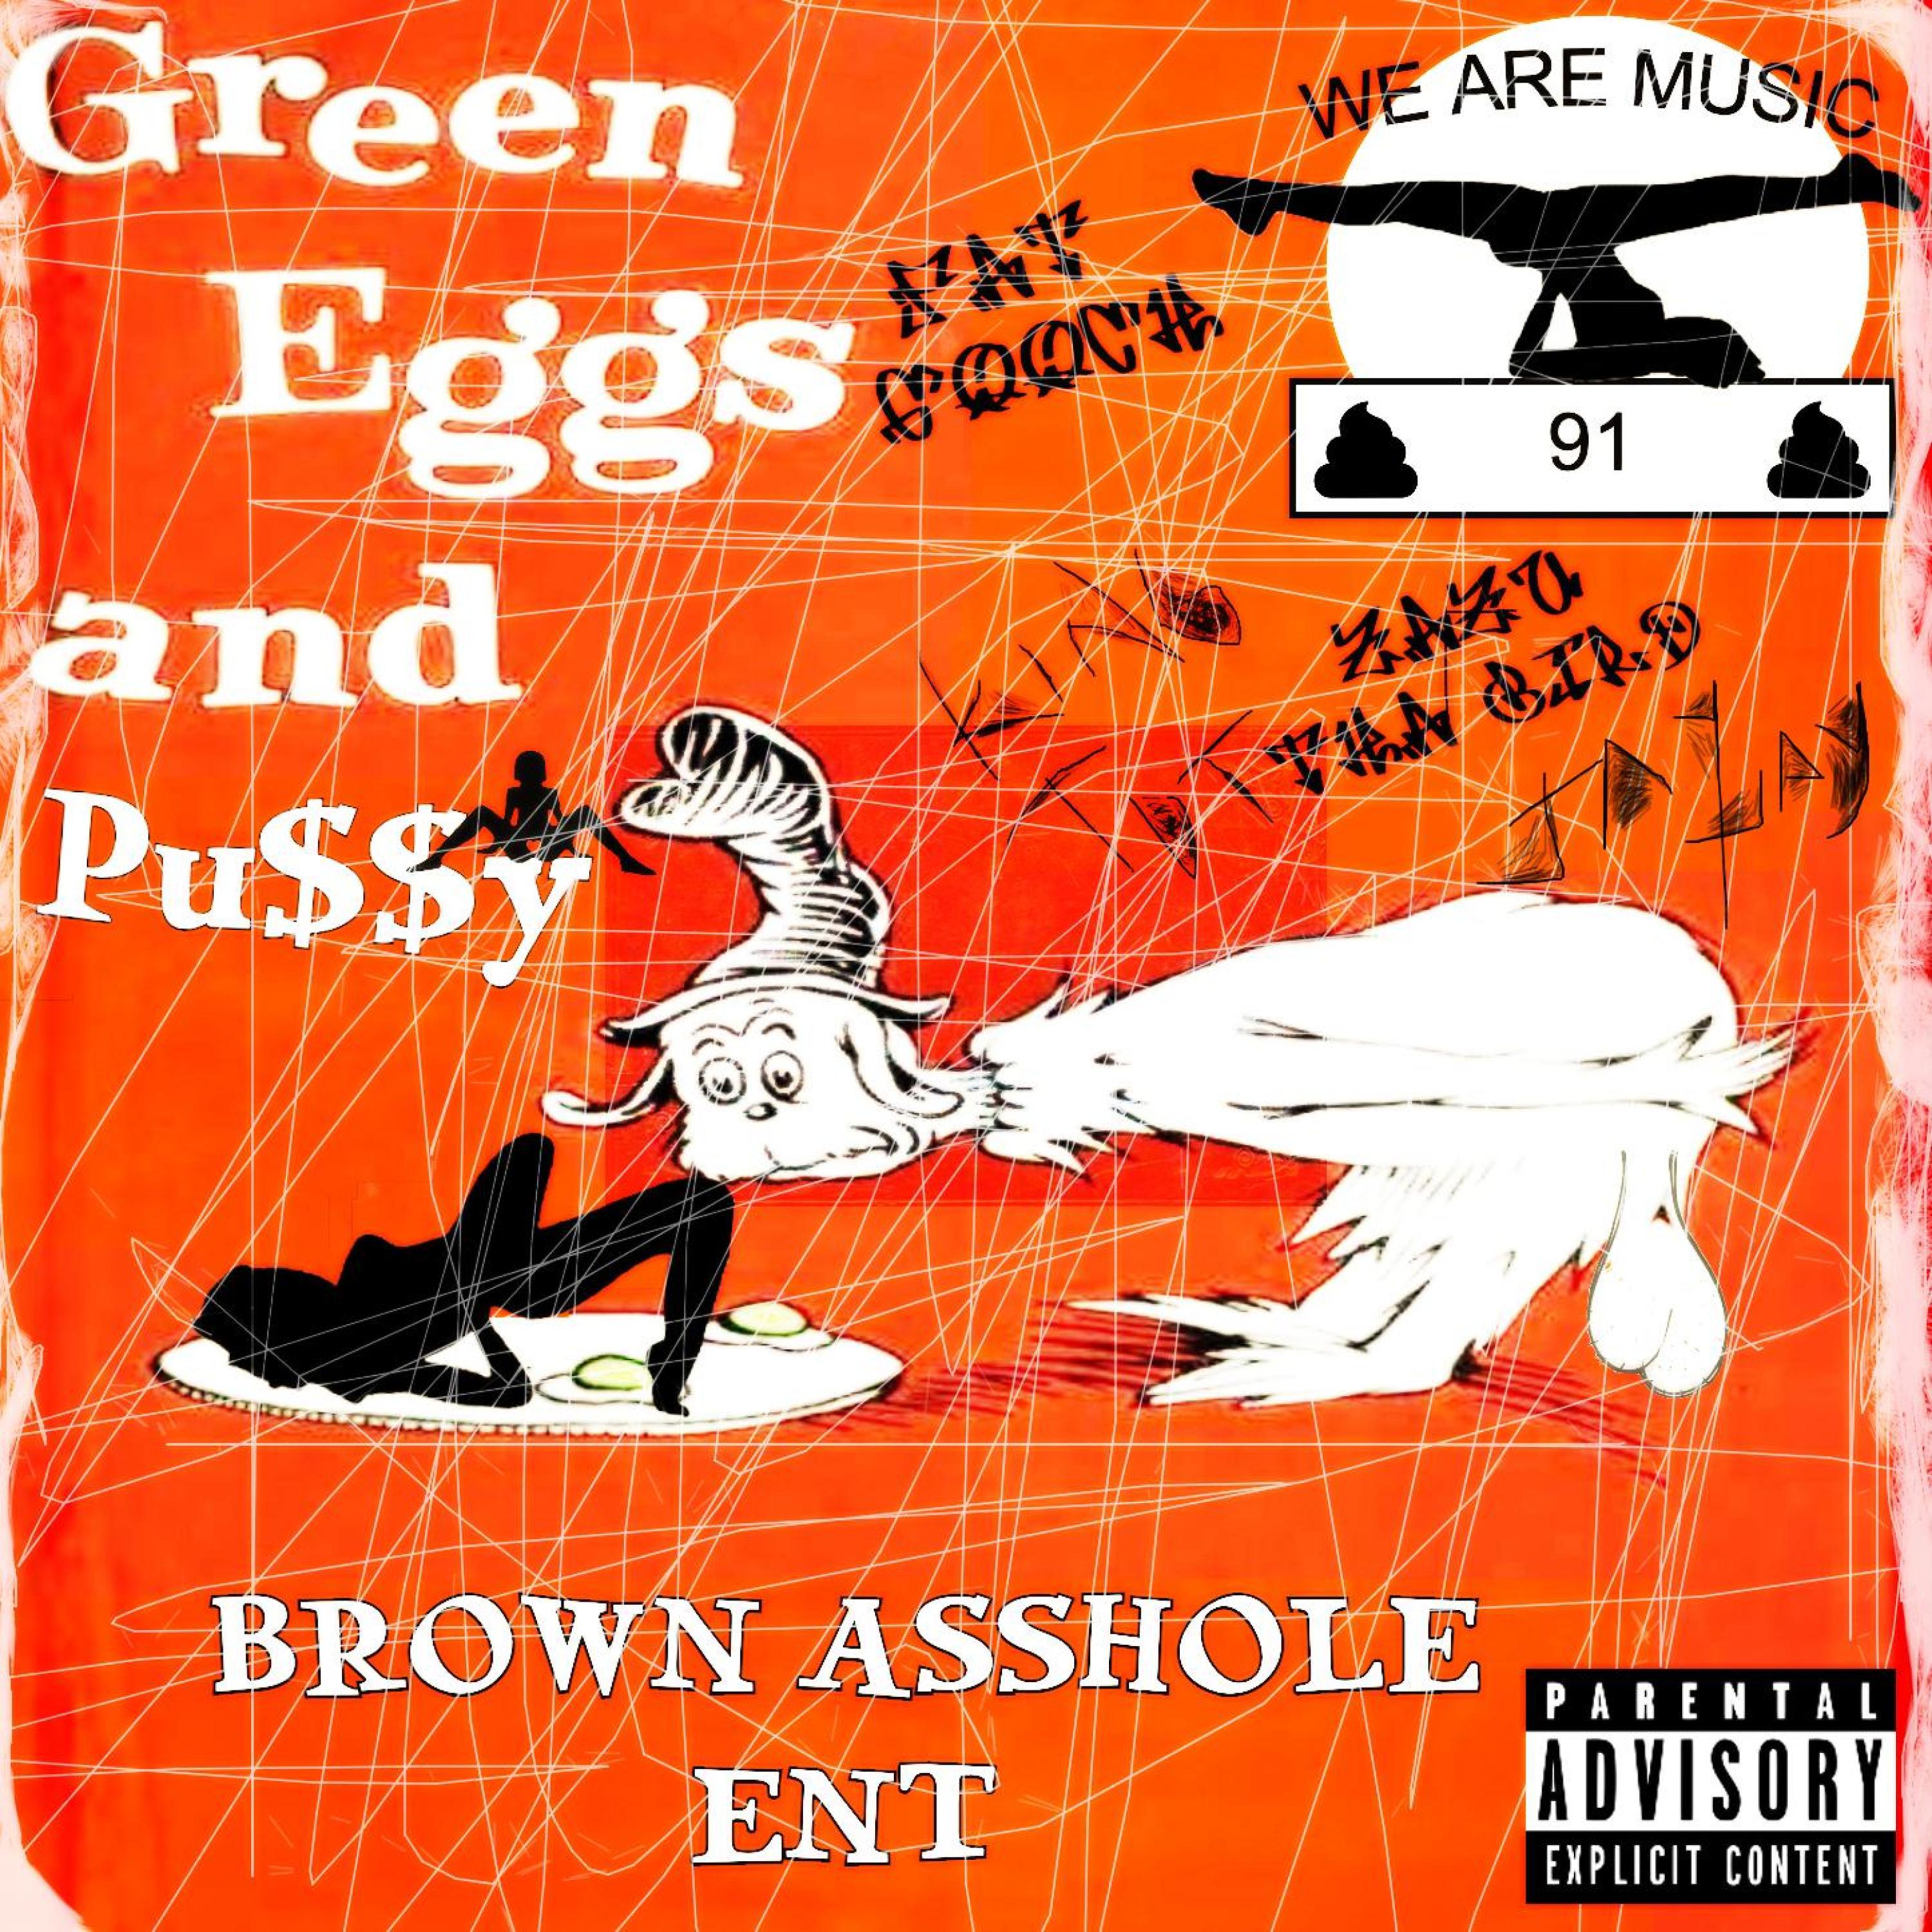 Brown Asshole Ent - Billy's Tits